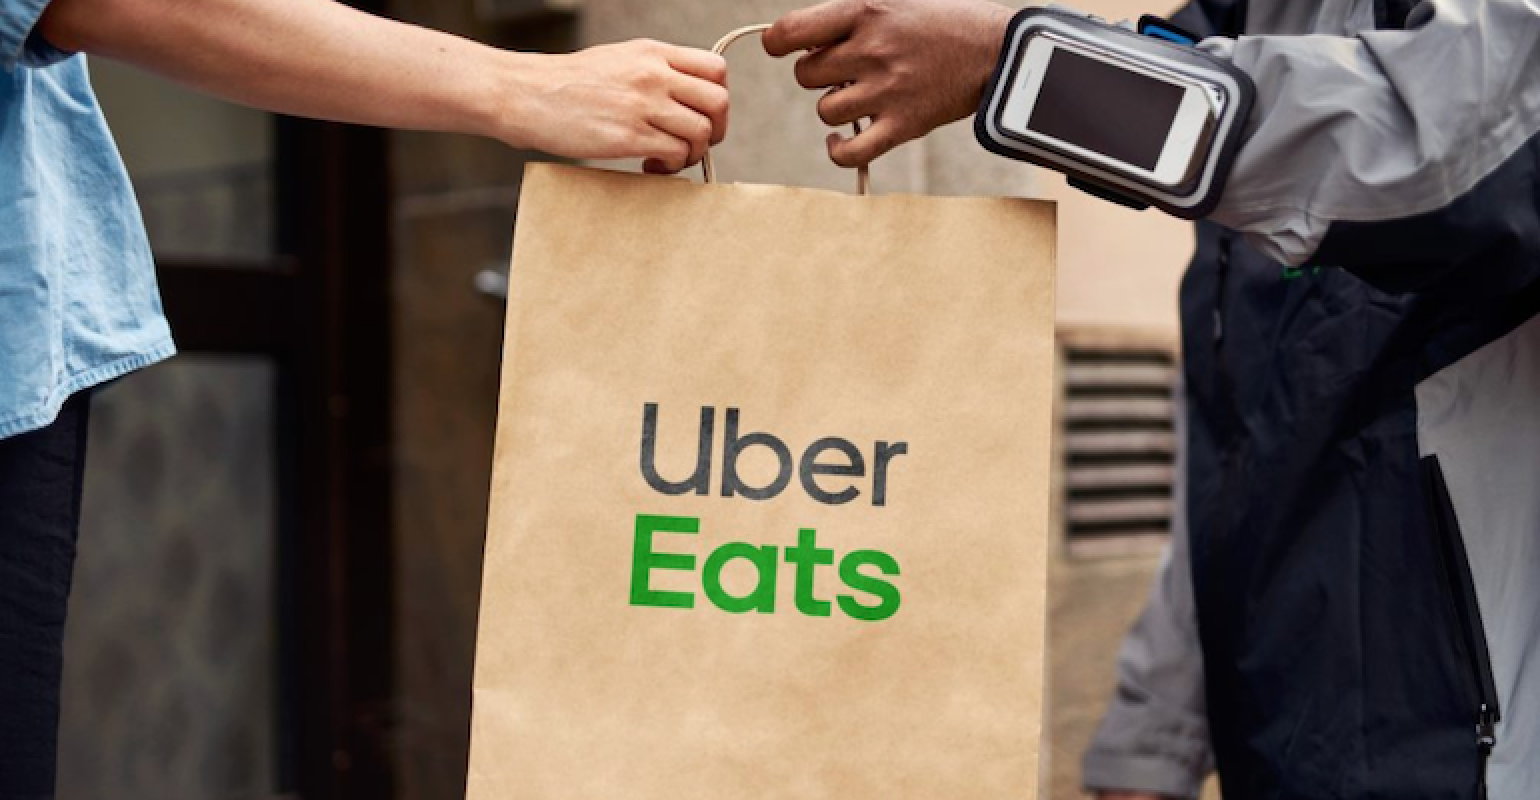 Uber Eats extends grocery delivery reach with Albertsons Supermarket News